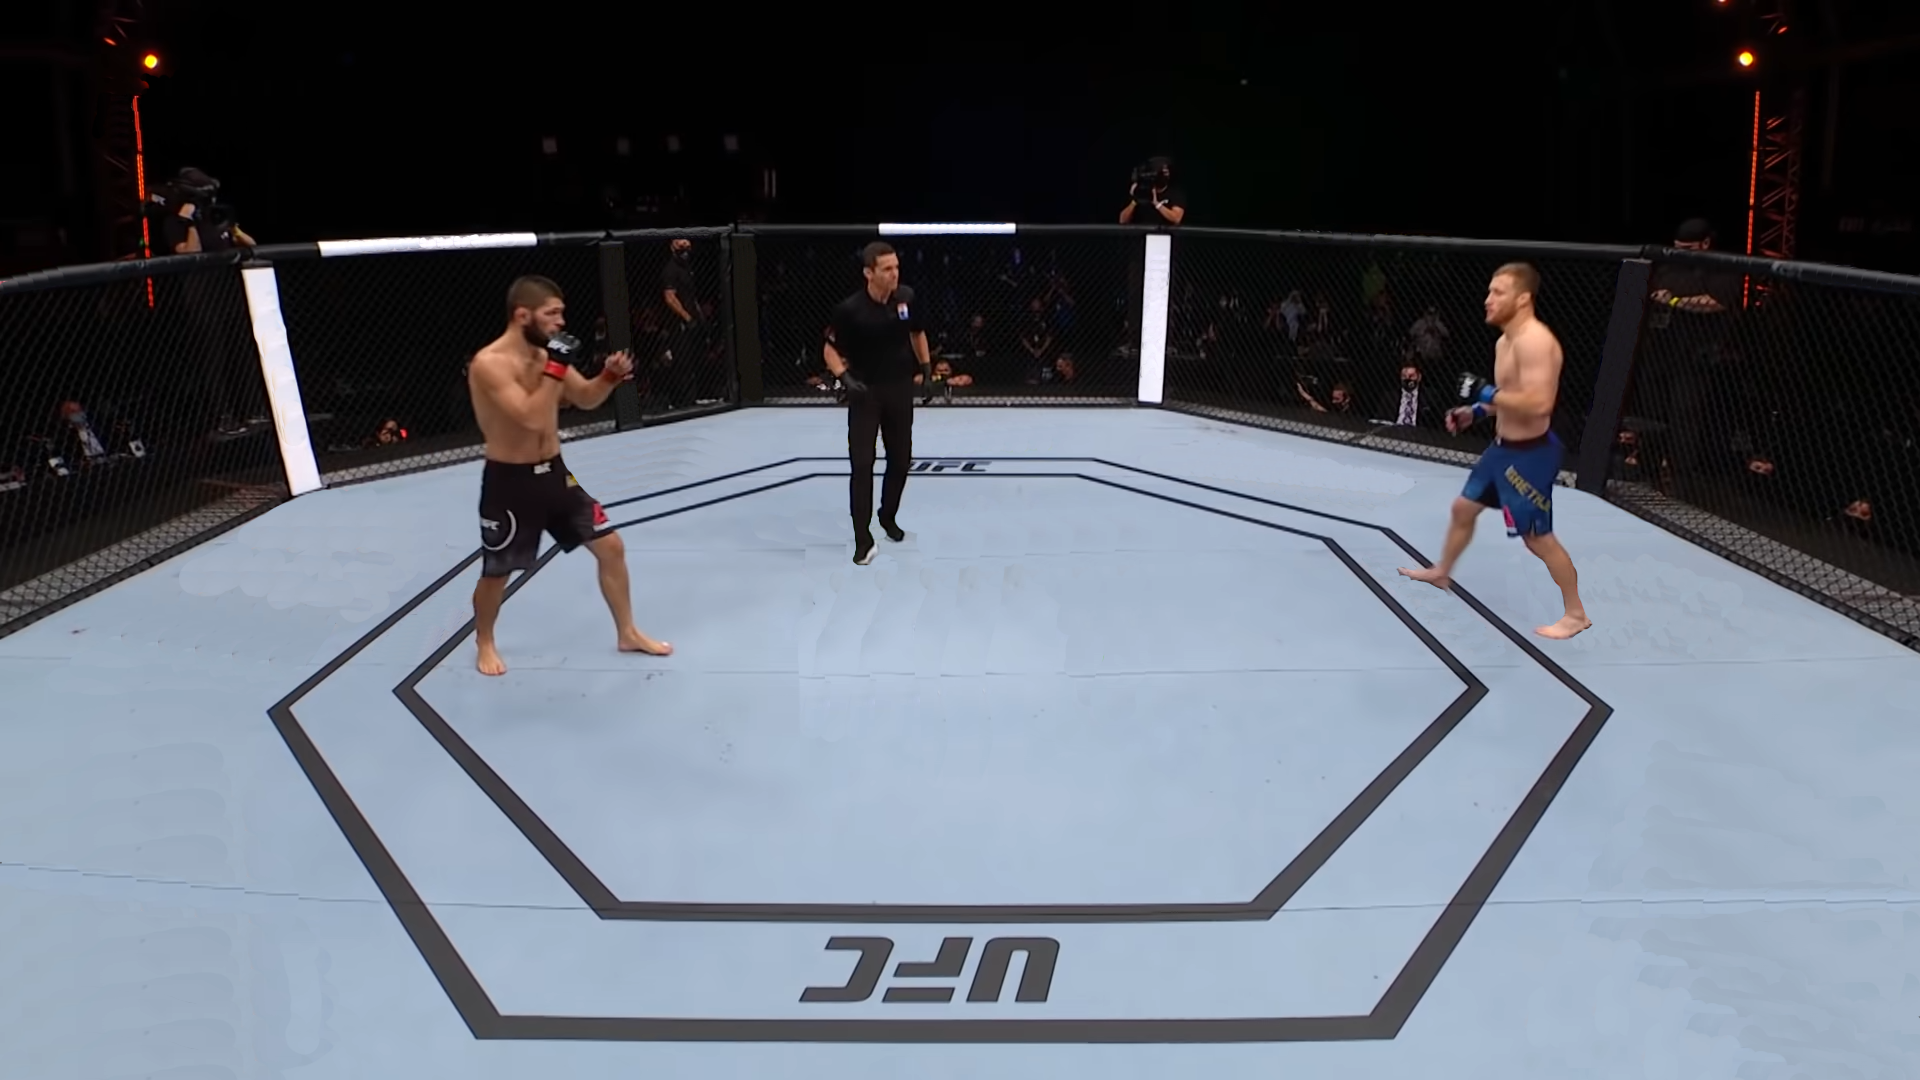 What the octagon would look like without ads